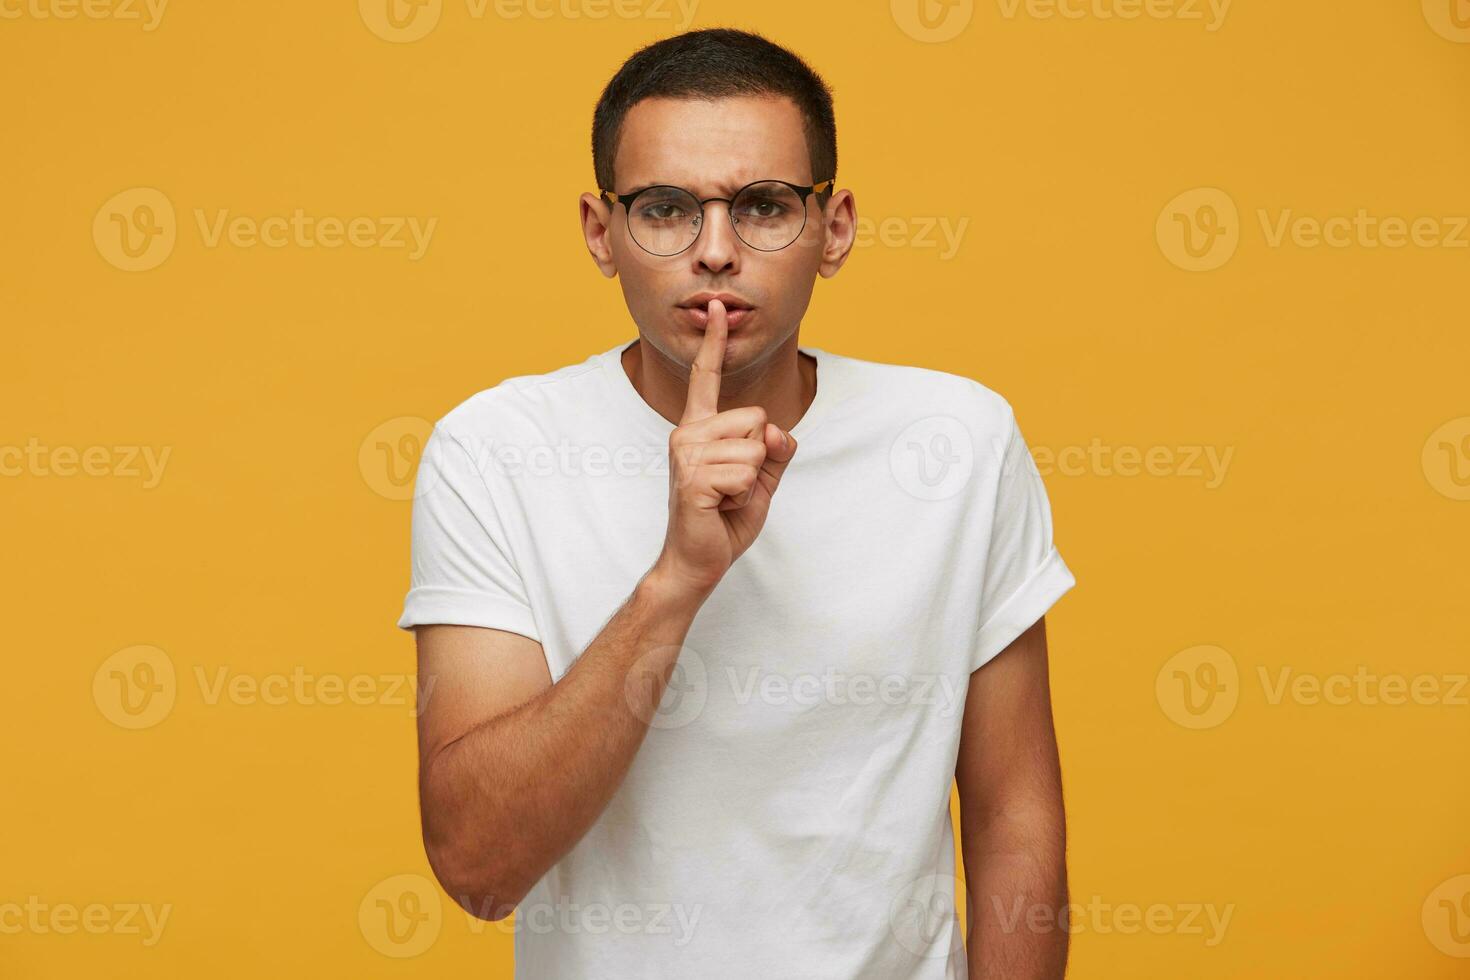 Emotional young man in glasses calls for silence, keep a secret, do not tell anyone, keep quiet, do not make noise, keeps fore finger on lips, demonstrates silence gesture, on a yellow background photo